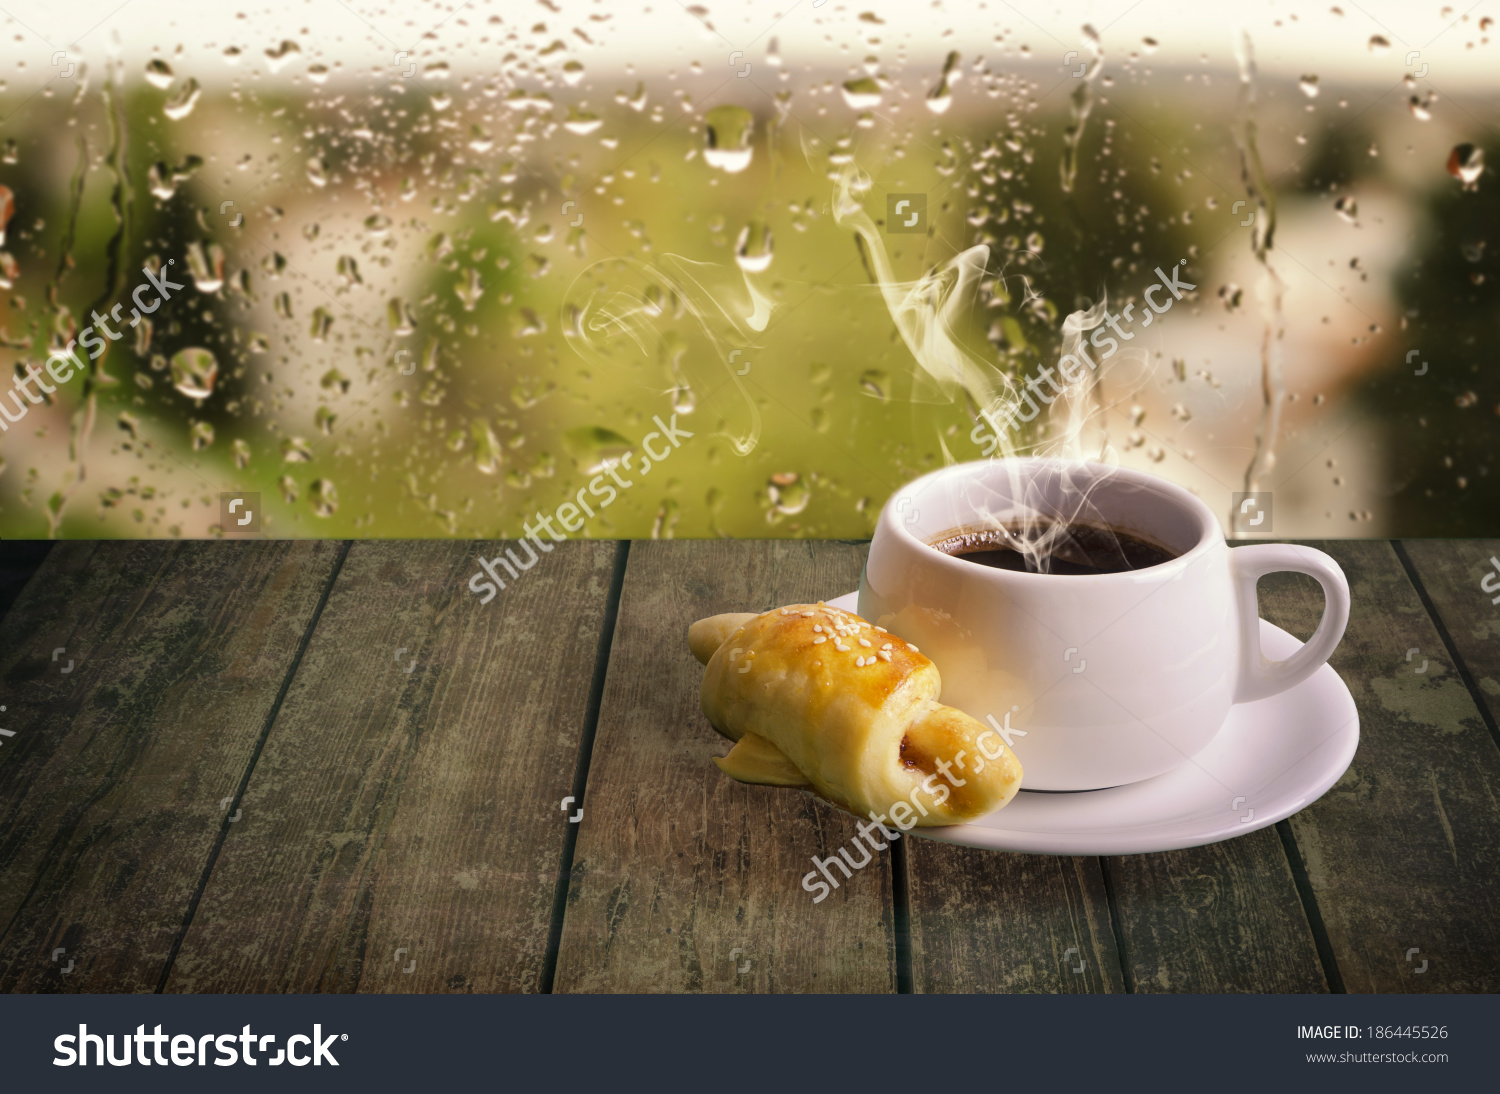 Steaming Coffee Cup On Rainy Day Stock Photo 186445526.